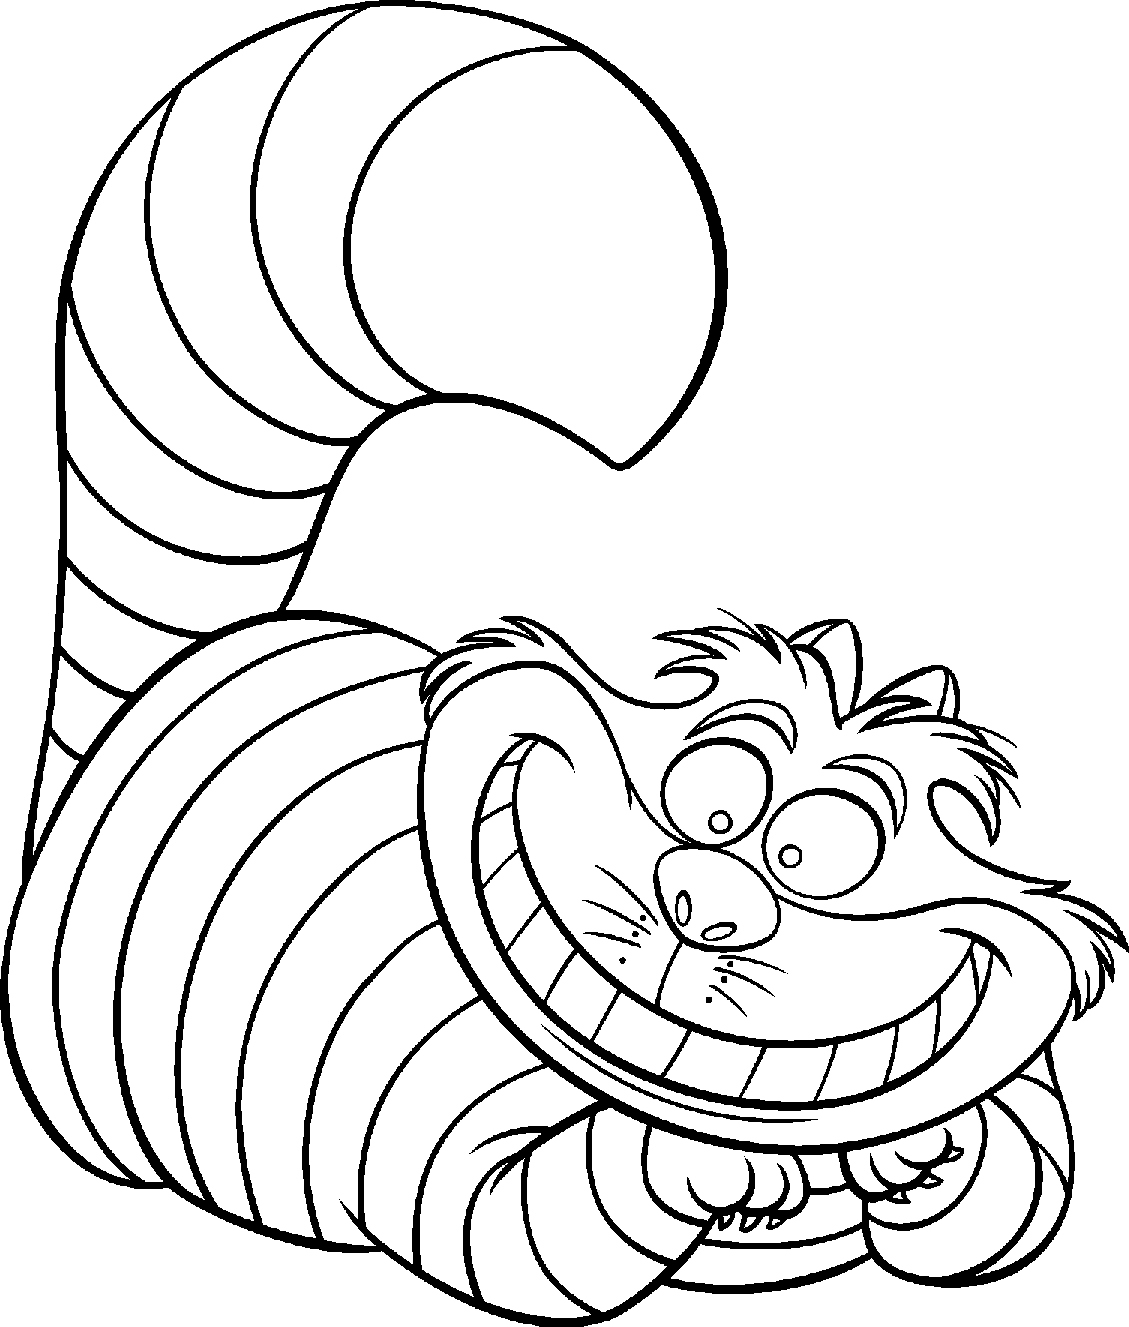 Download Free Printable Funny Coloring Pages For Kids